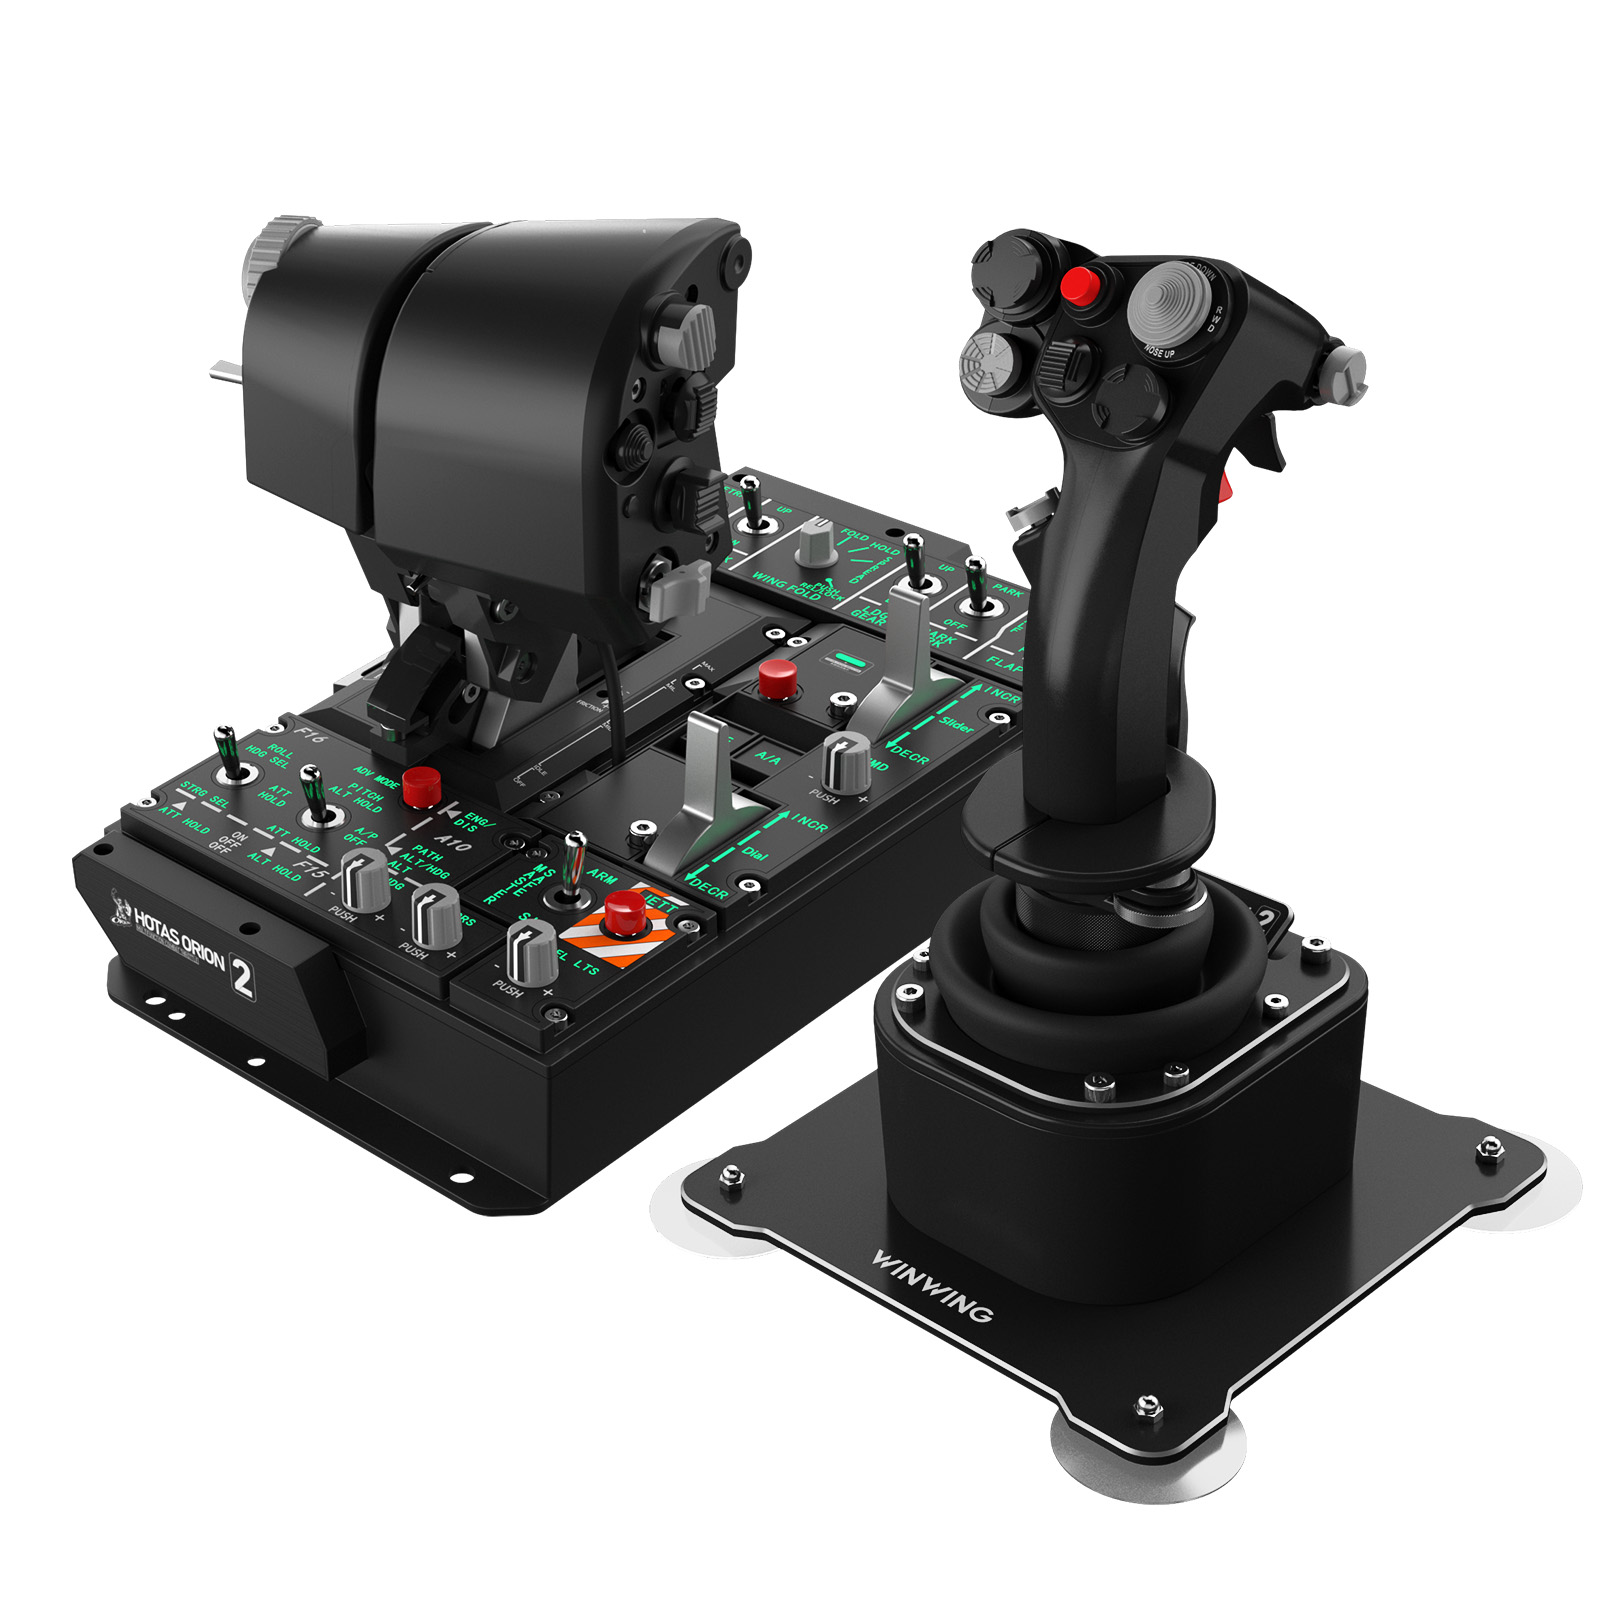 PurchaseOrion2 18 Throttle Combo-Offical Store for WINWING